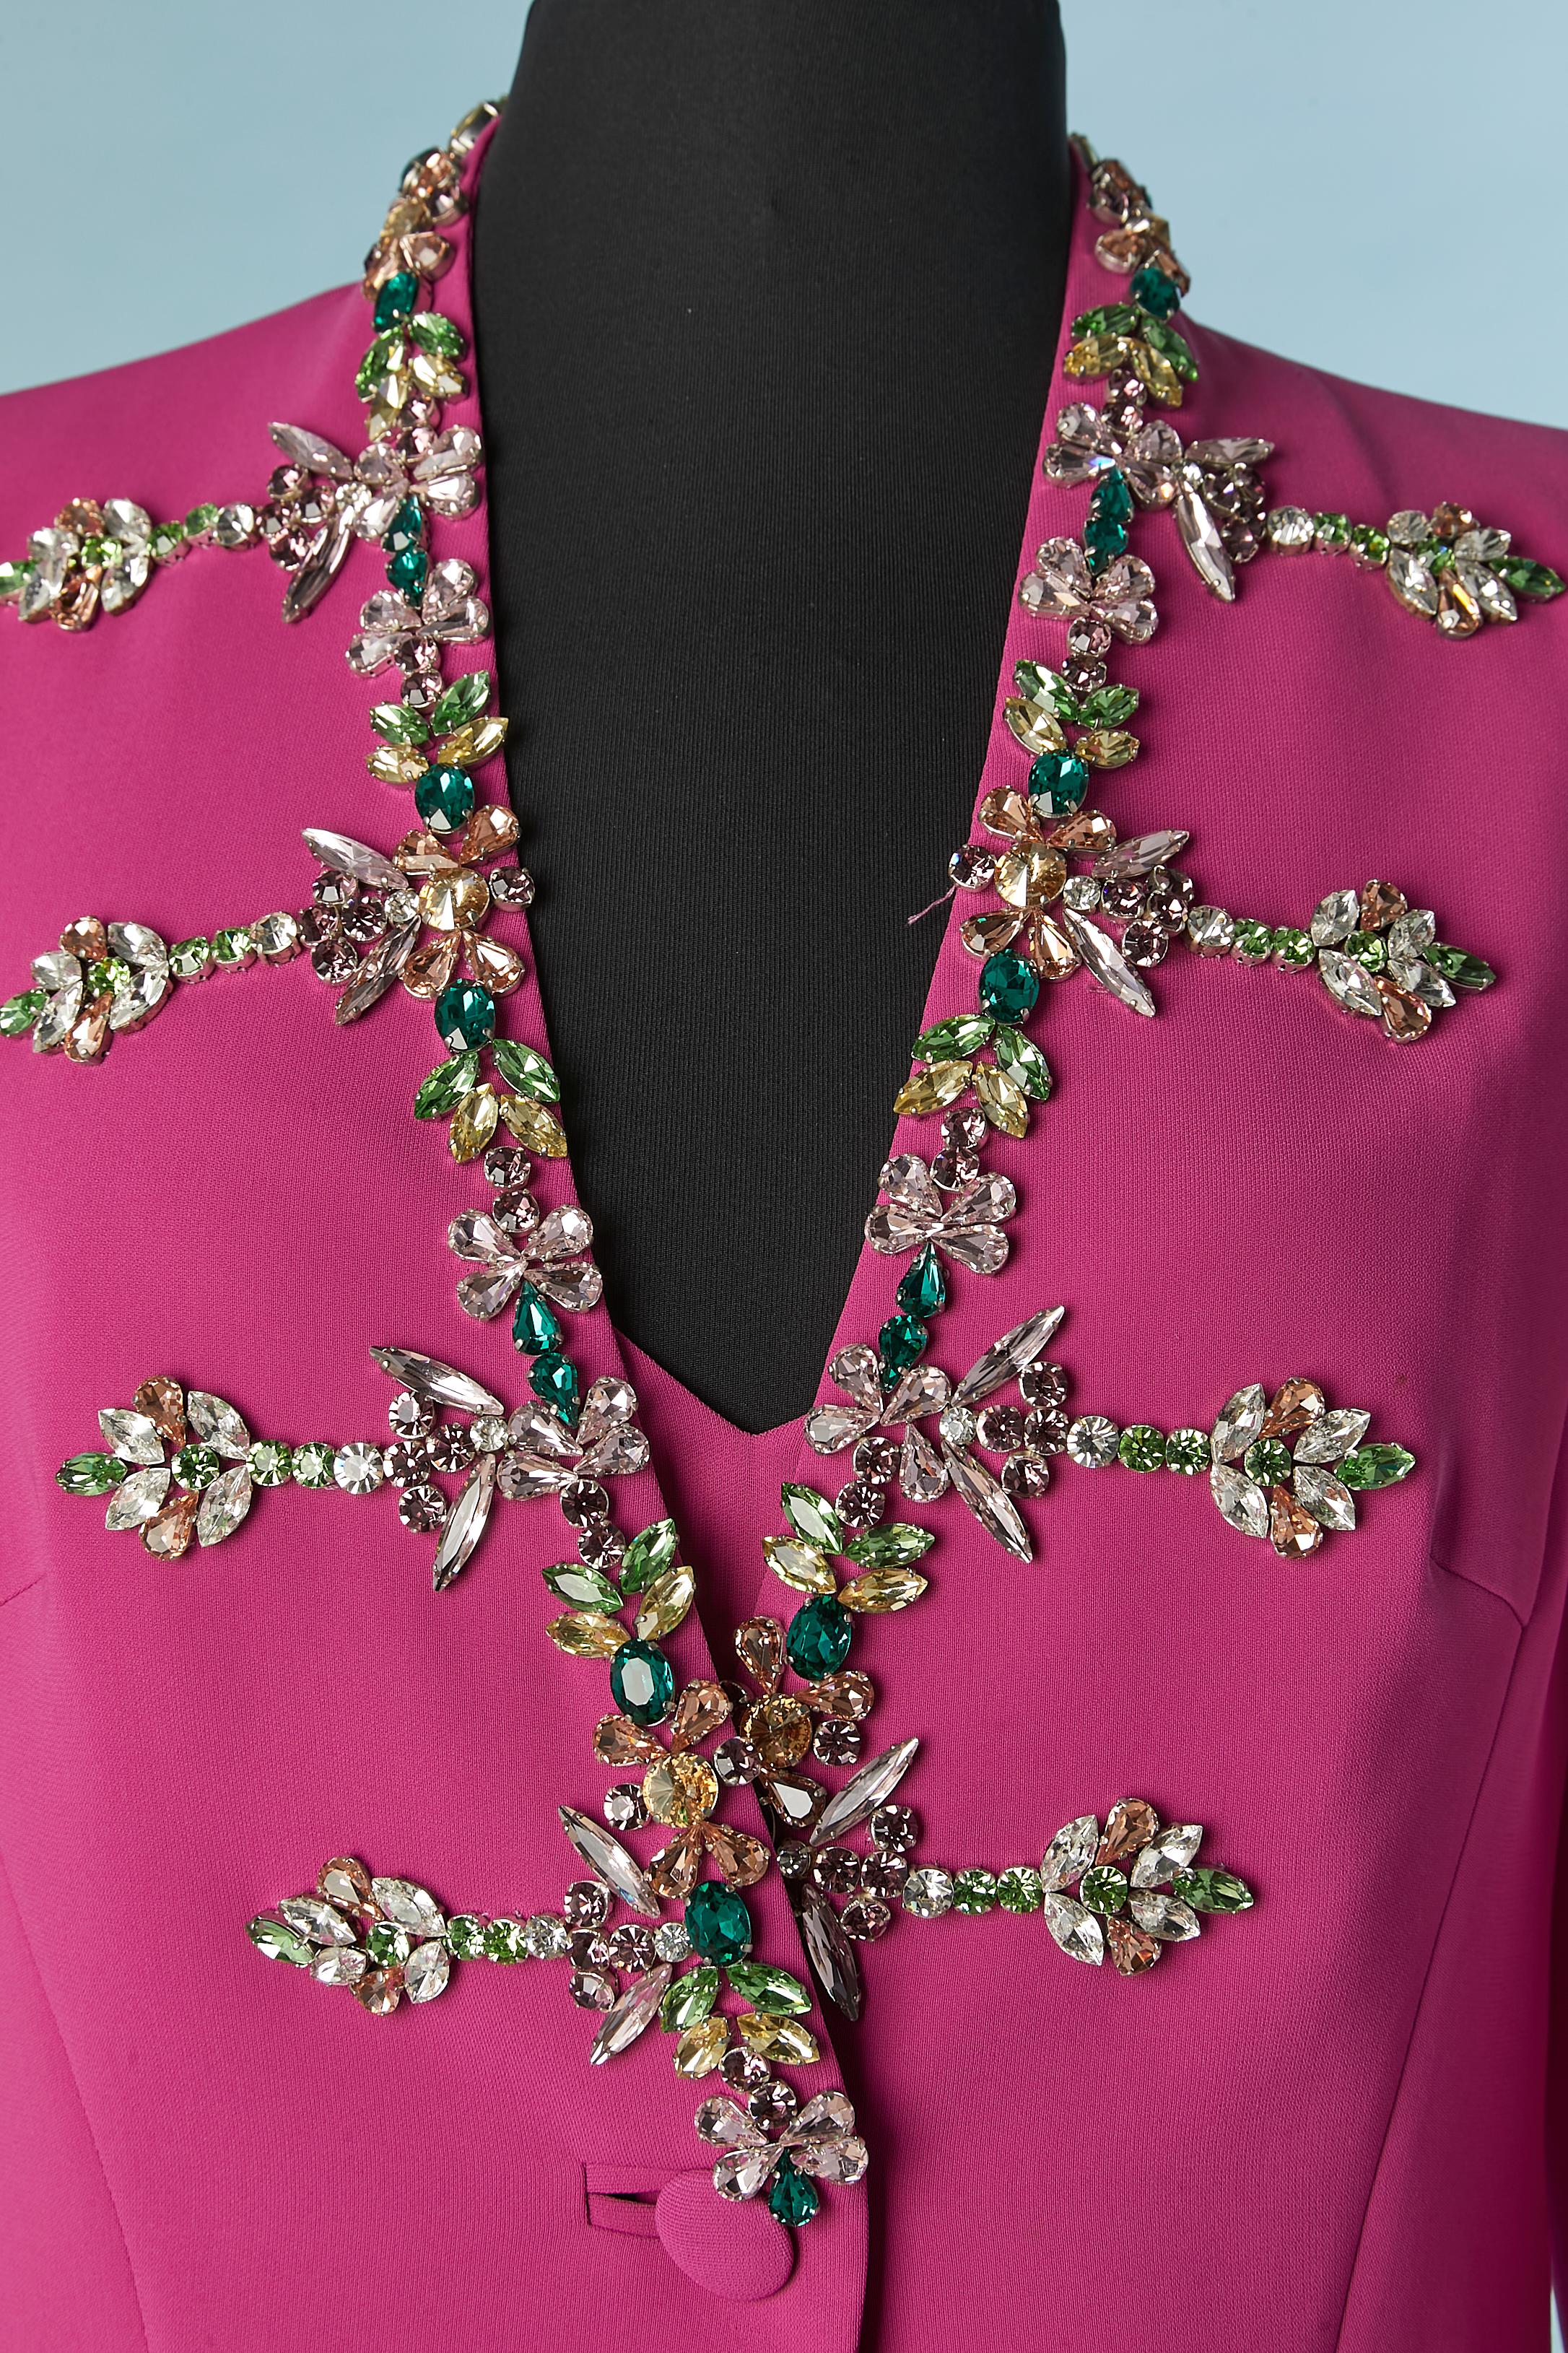 Fushia jacket with rhinestone and dress ensemble Gai Mattiolo The Red Carpet  In Excellent Condition For Sale In Saint-Ouen-Sur-Seine, FR